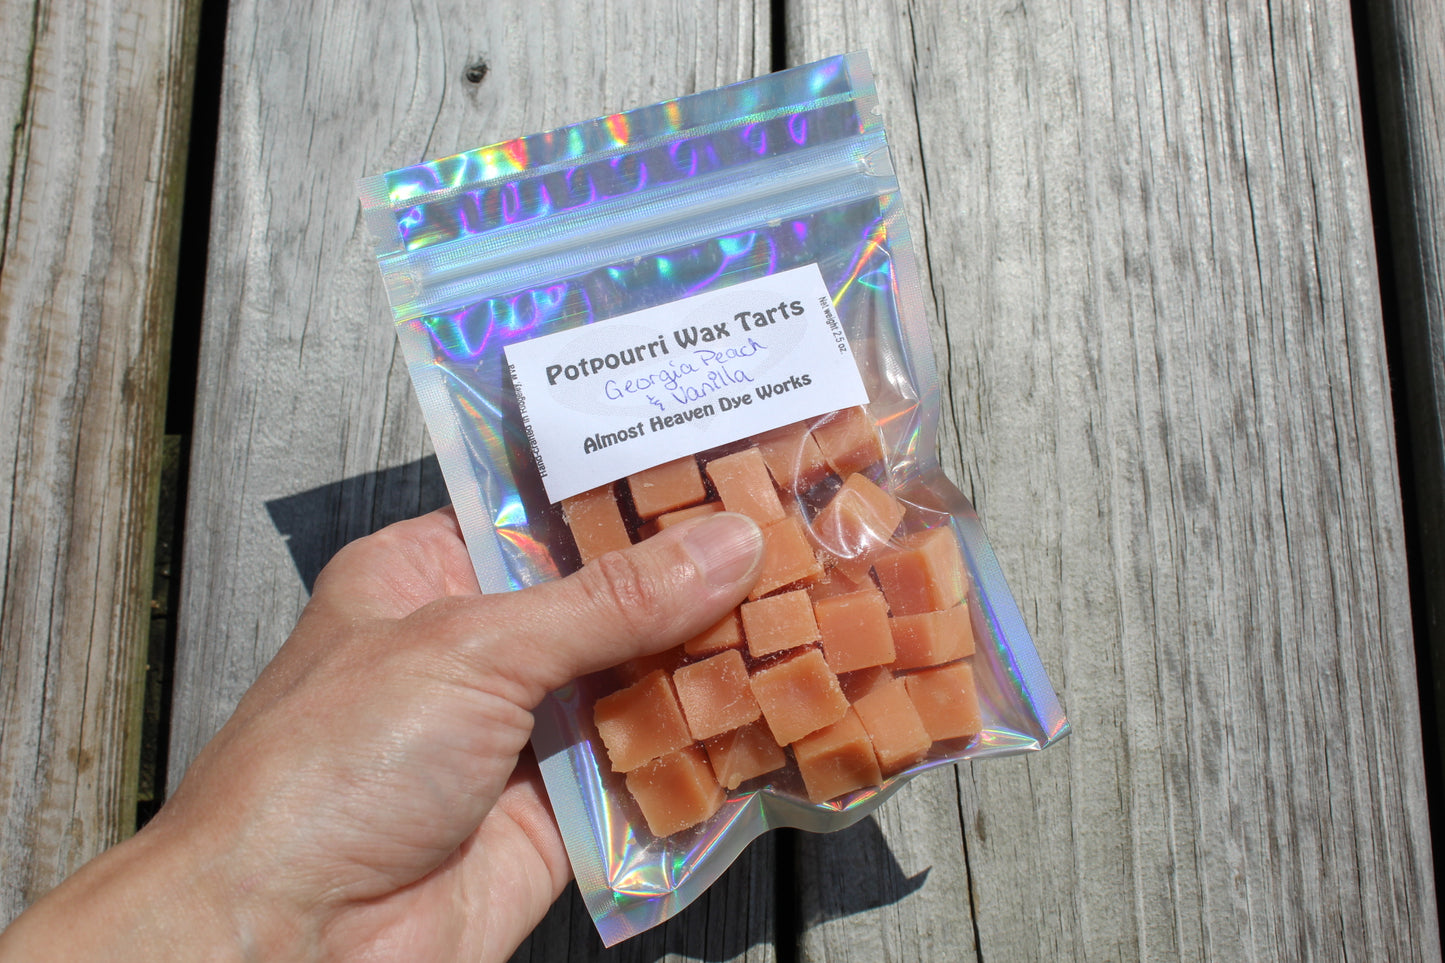 HILLBILLY HOME BREW Wax Melts Tarts SUPER STRONG 40+ pc Mini Cubes Han –  Almost Heaven Dye Works